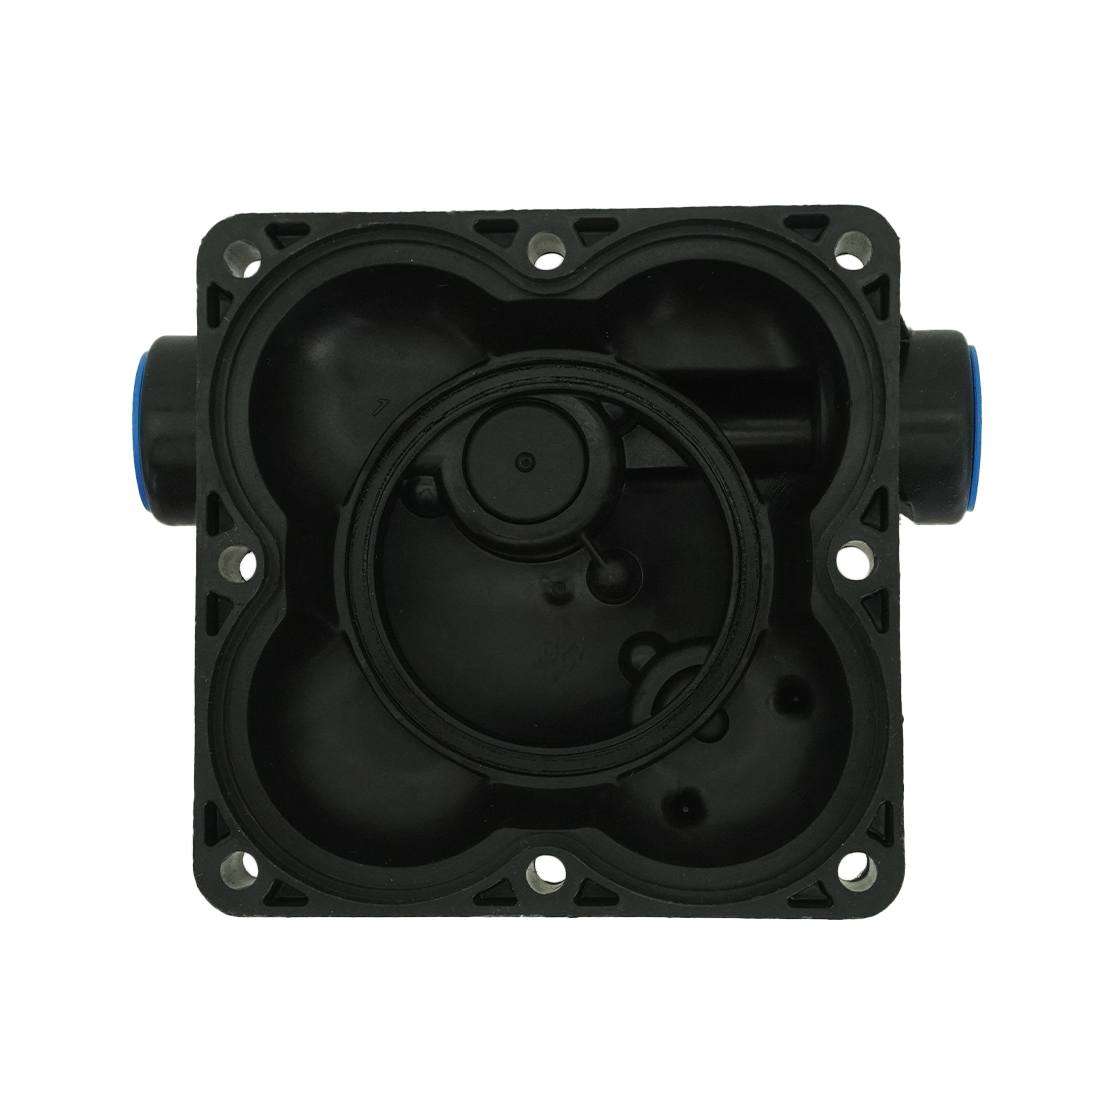 XERO 12V Booster Pump - Upper Housing Replacement Top View